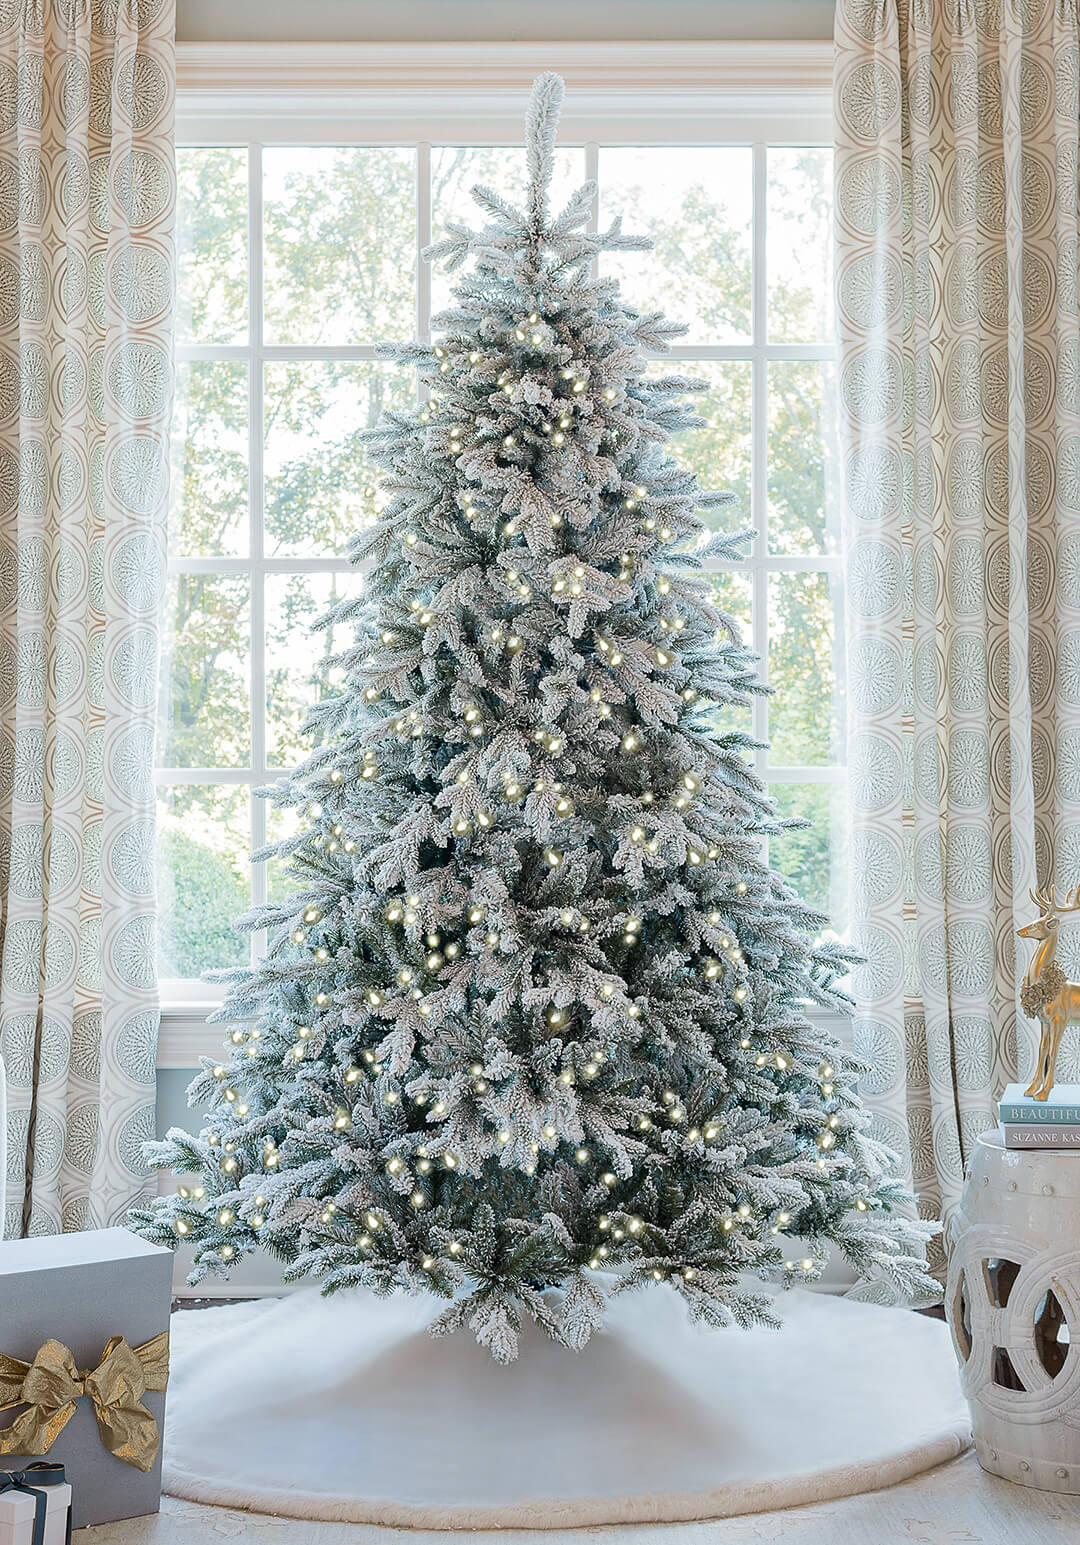 King of Christmas 9' Queen Flock® Artificial Christmas Tree with 1100 Warm White LED Lights